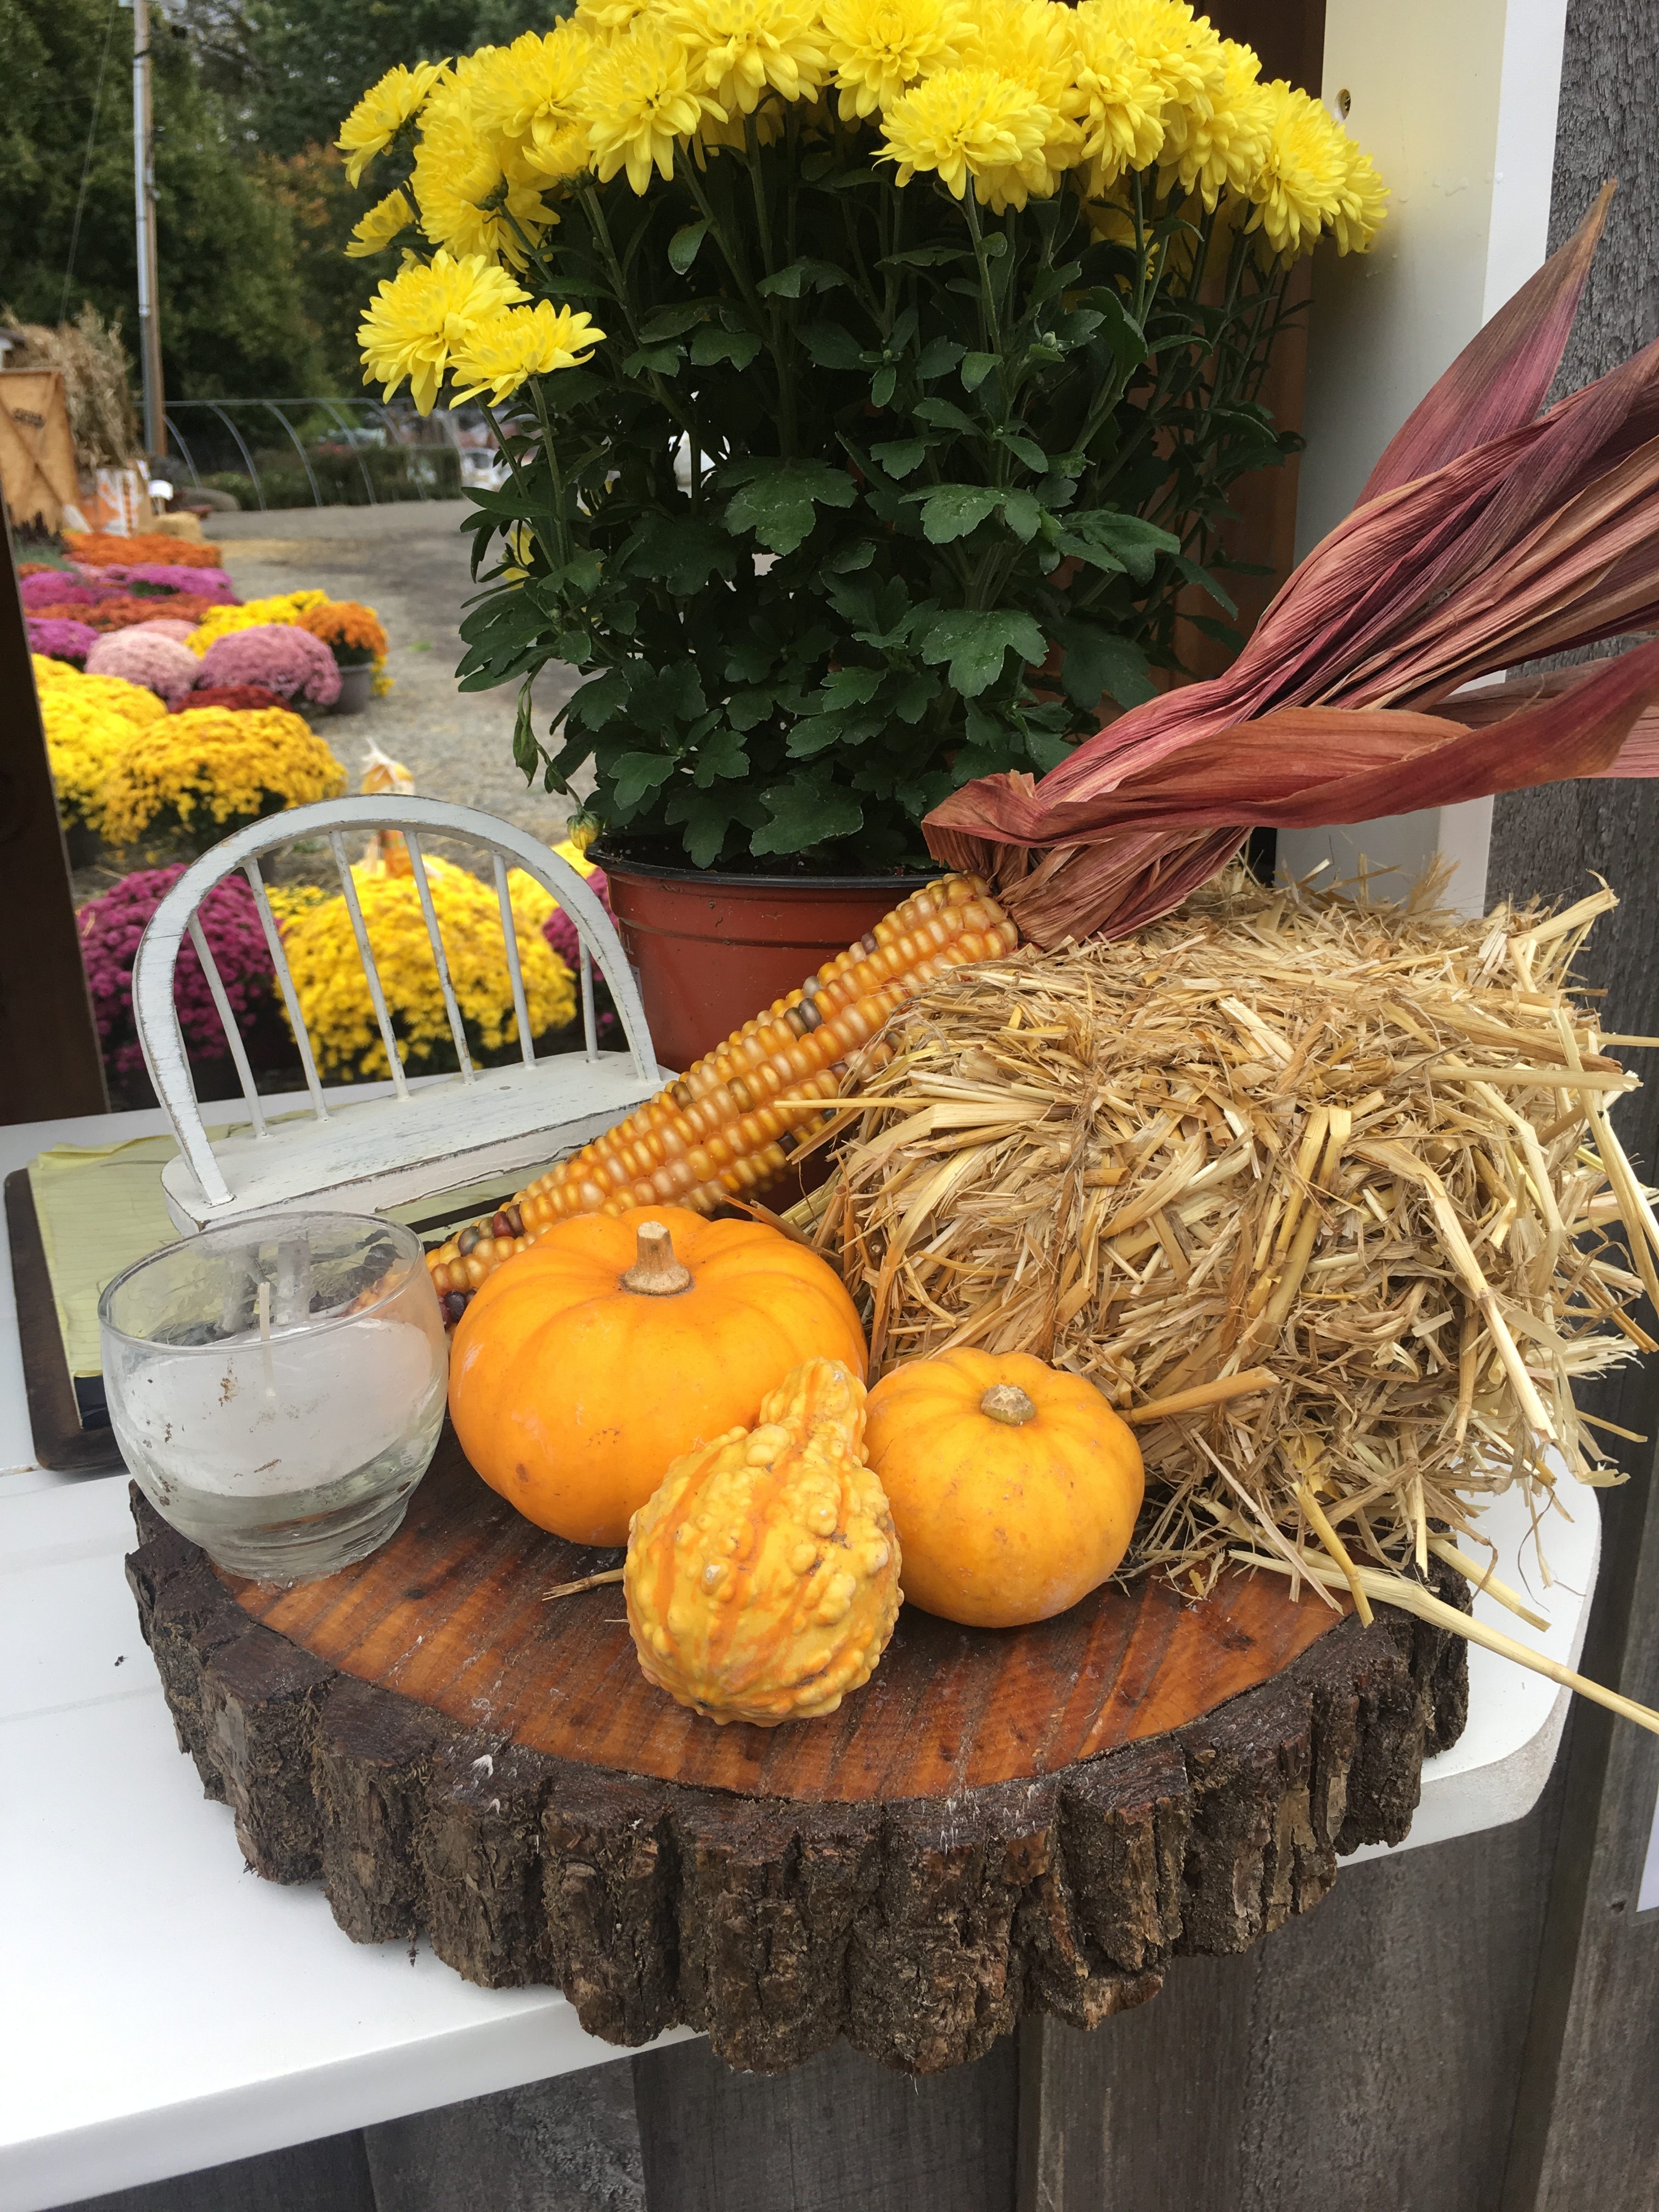 Handmade Fall Decor for sale! It's perfect for a fall table display!